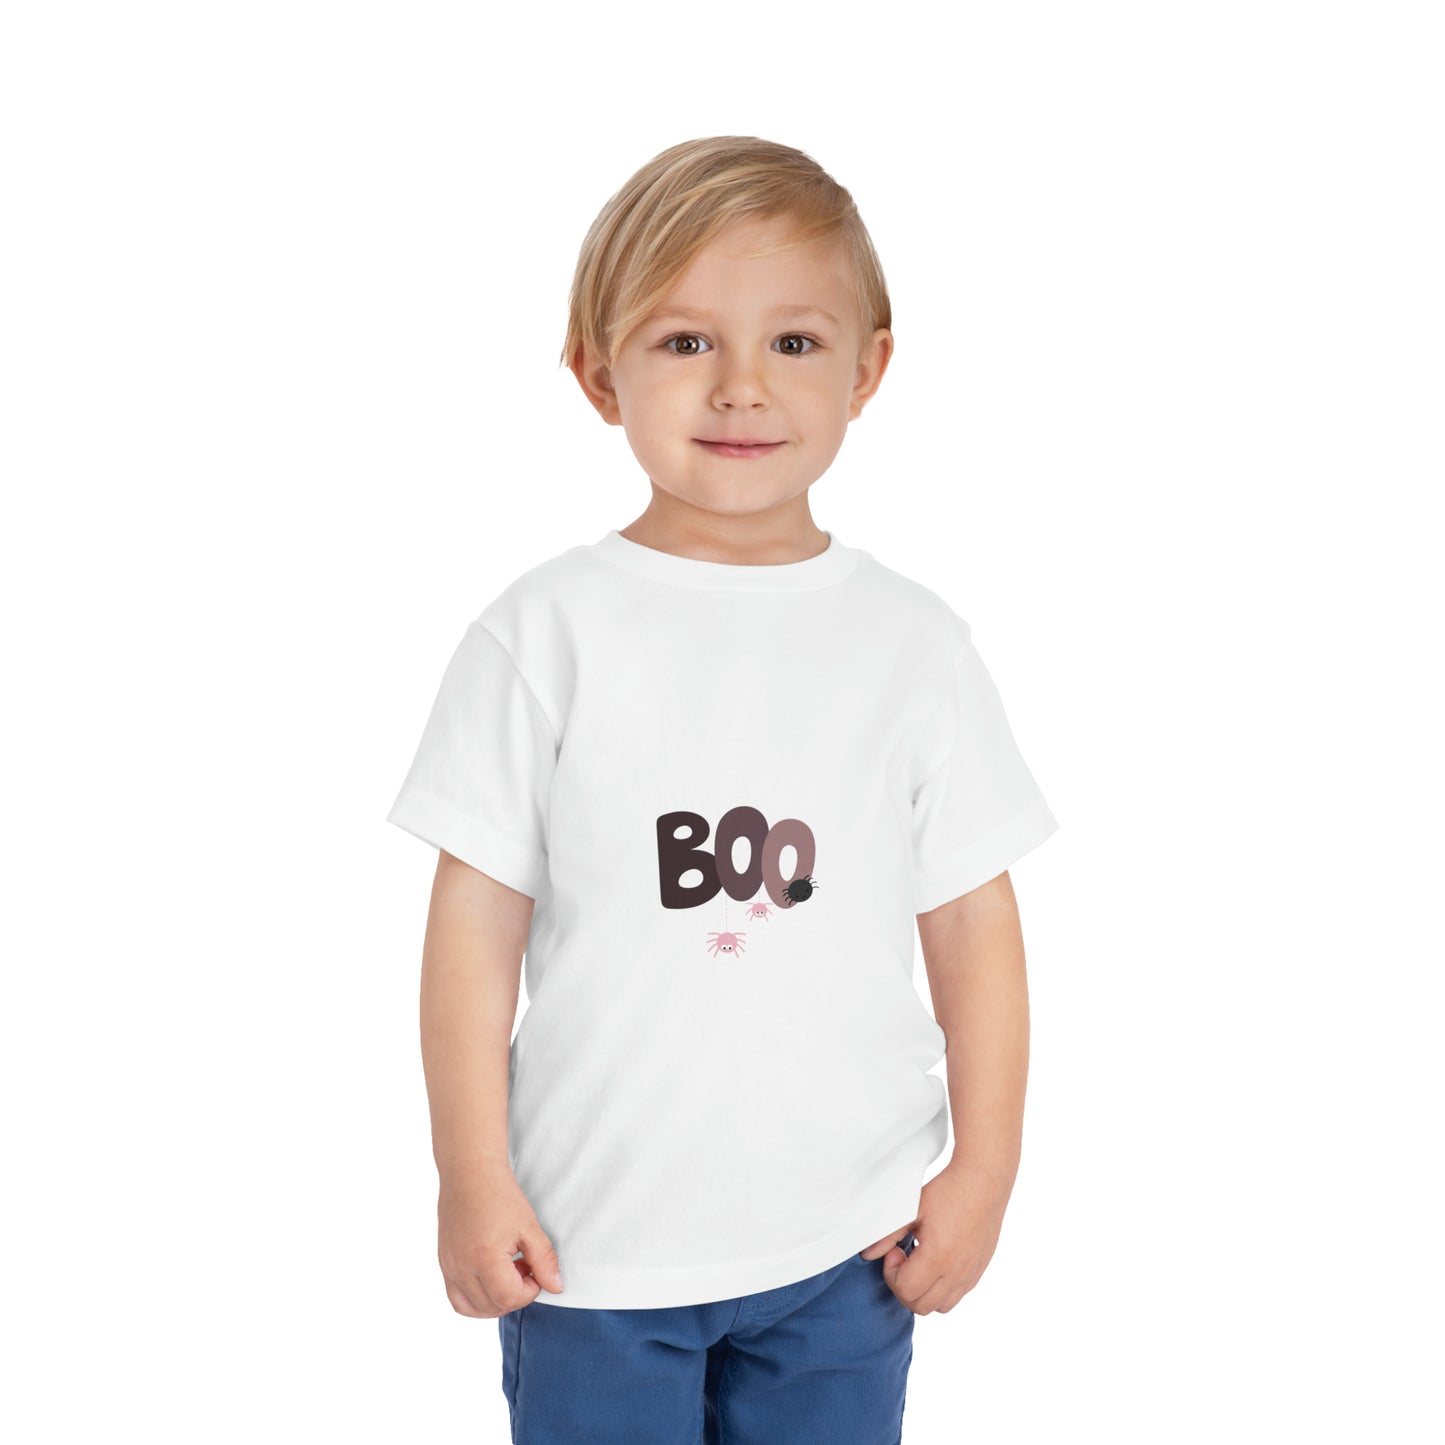 "Adorable Toddler Short Sleeve Tee with a Spooky Twist – Explore Our Collection of Halloween-Inspired Kids' Apparel for Your Little BOO!"